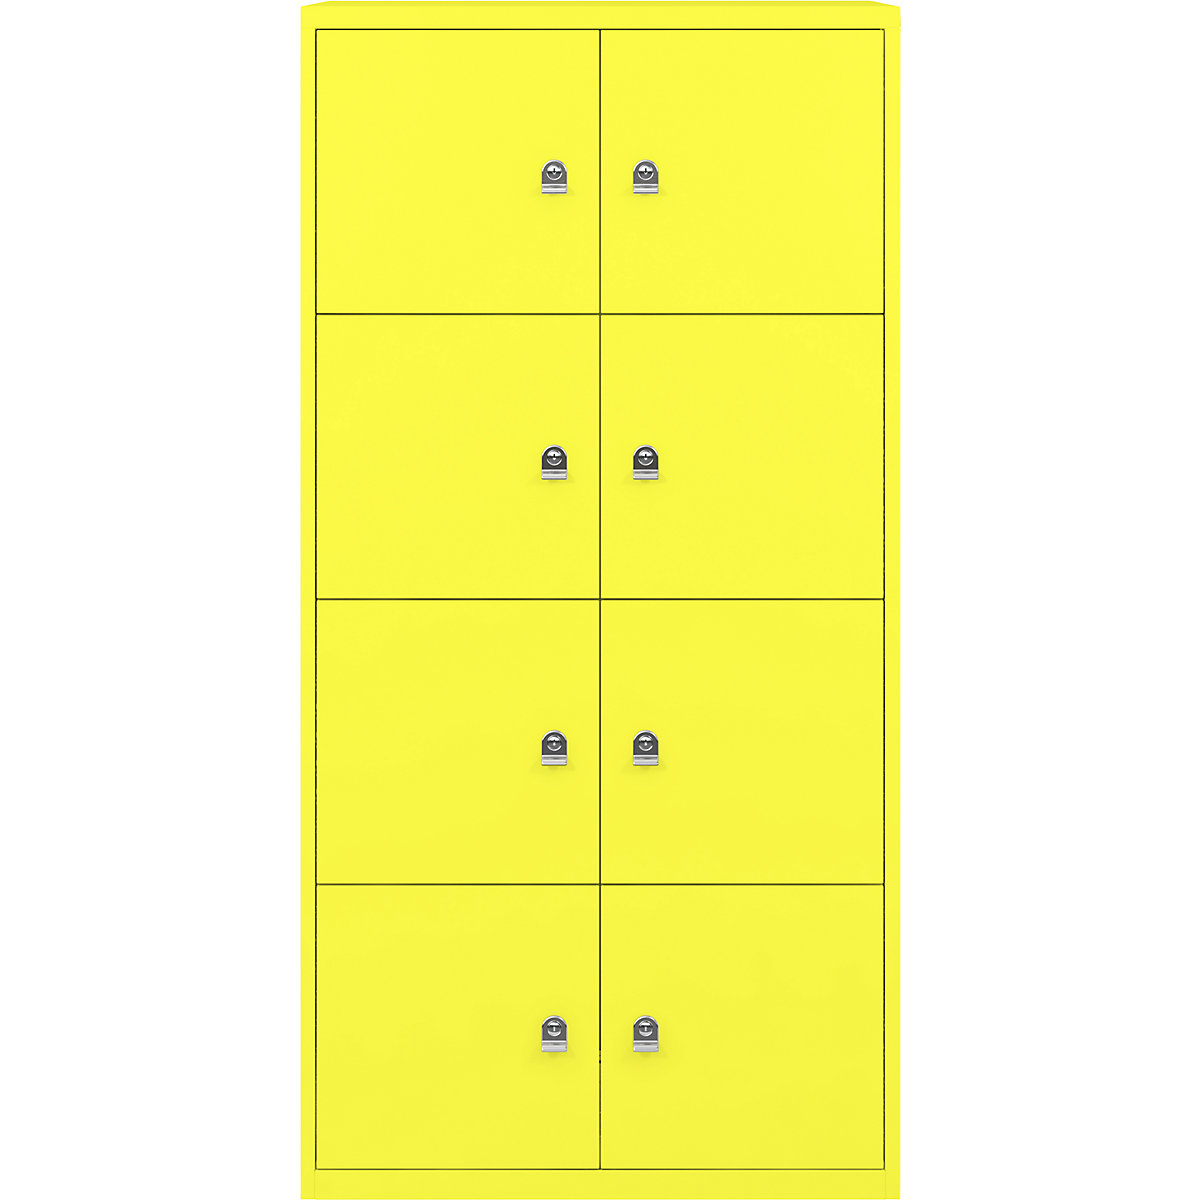 BISLEY – LateralFile™ lodge, with 8 lockable compartments, height 375 mm each, zinc yellow